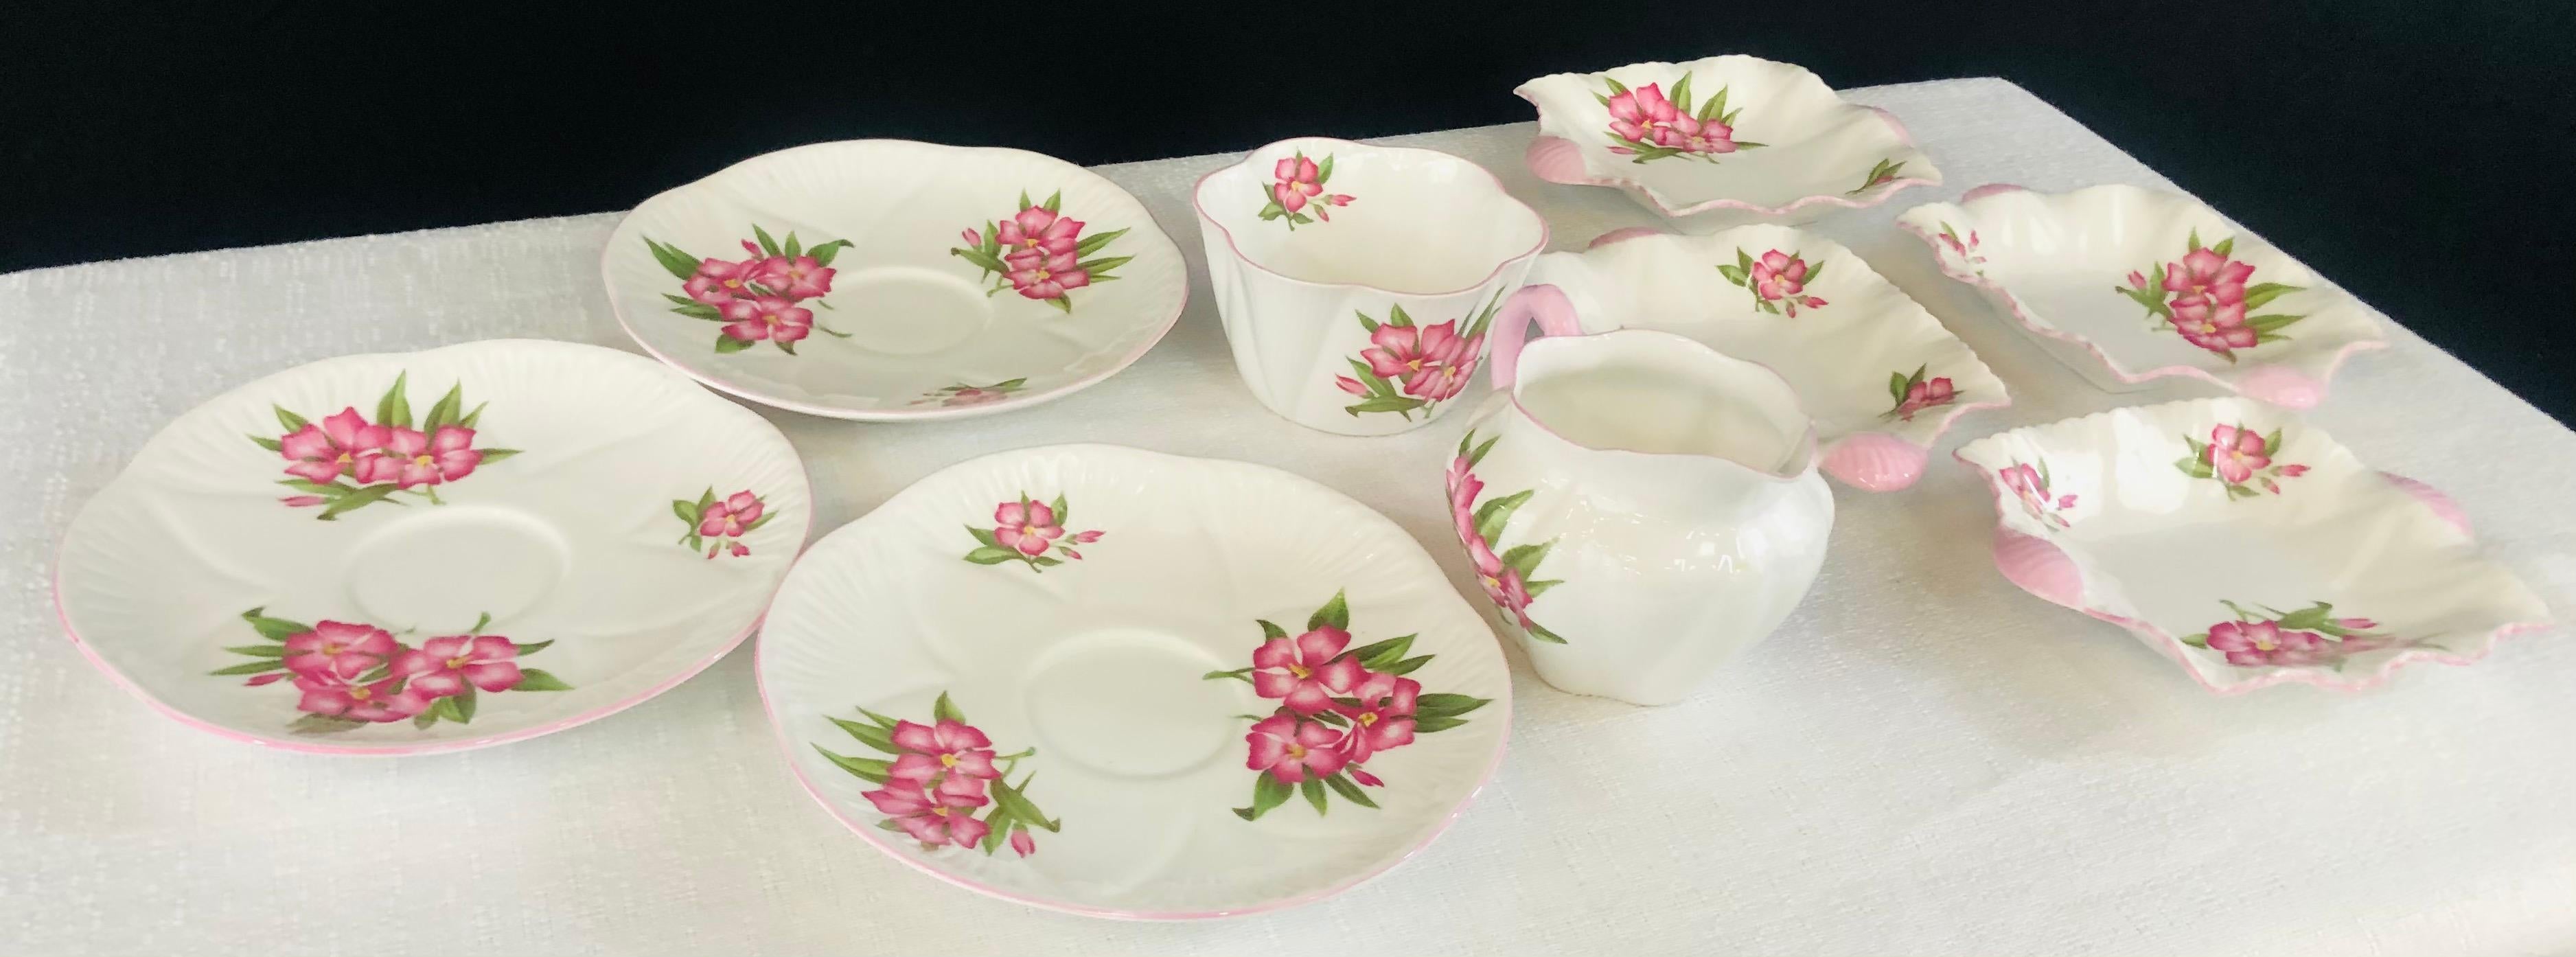 An Art Deco Shelley serving tea time set with 8 pieces in good condition. The porcelain pieces features beautiful flowers designs.

Biggest plate 6